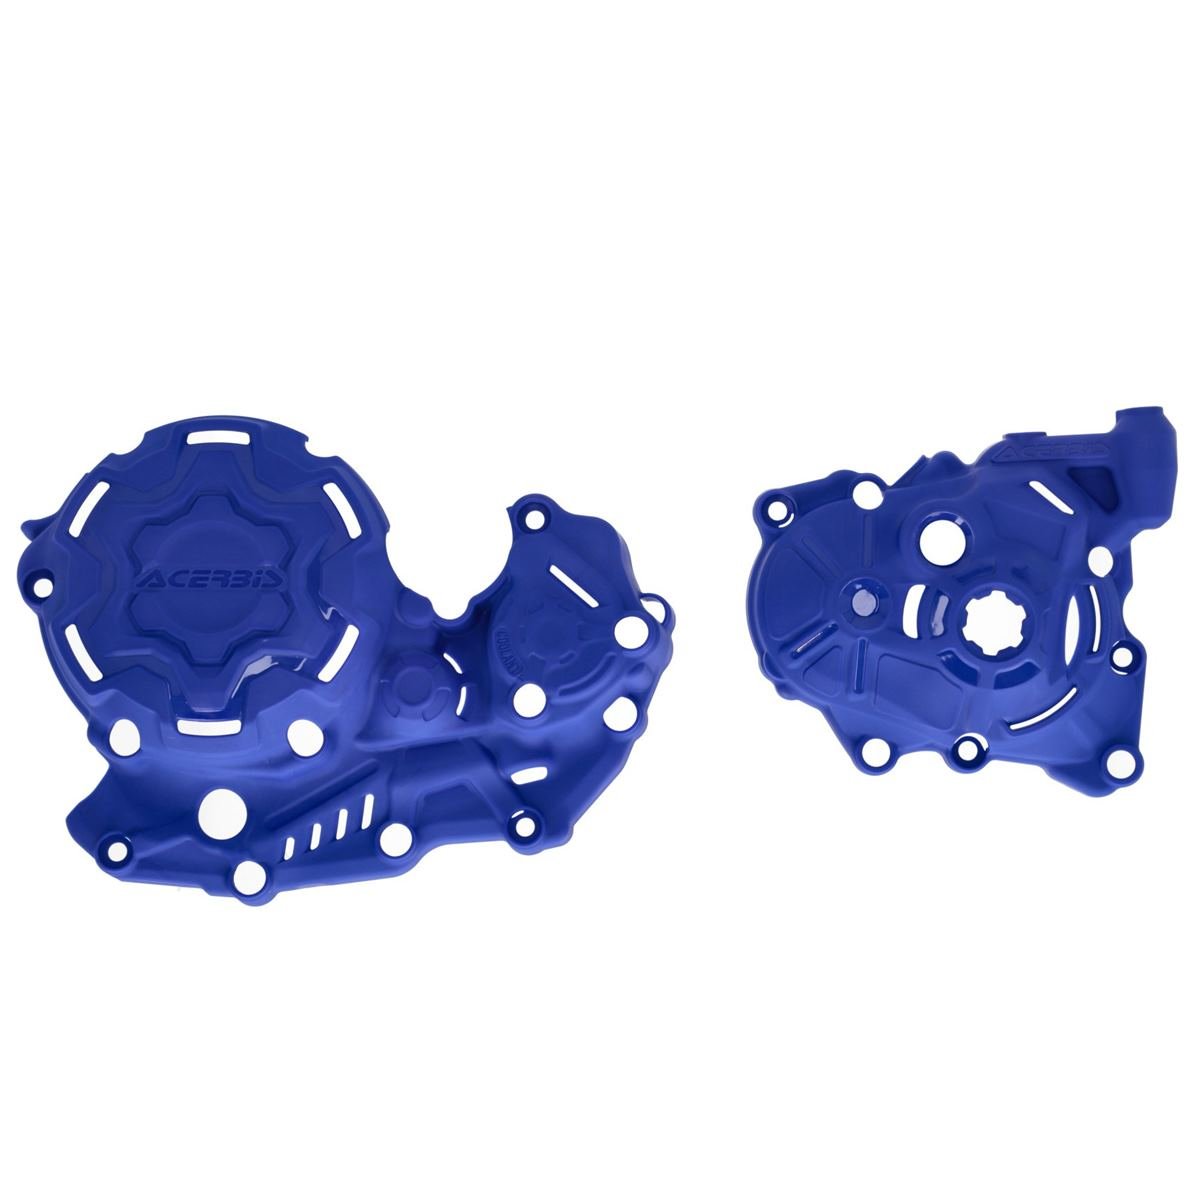 Acerbis Clutch/Ignition Cover Protection X-Power Yamaha YZ 450F 23-, Blue